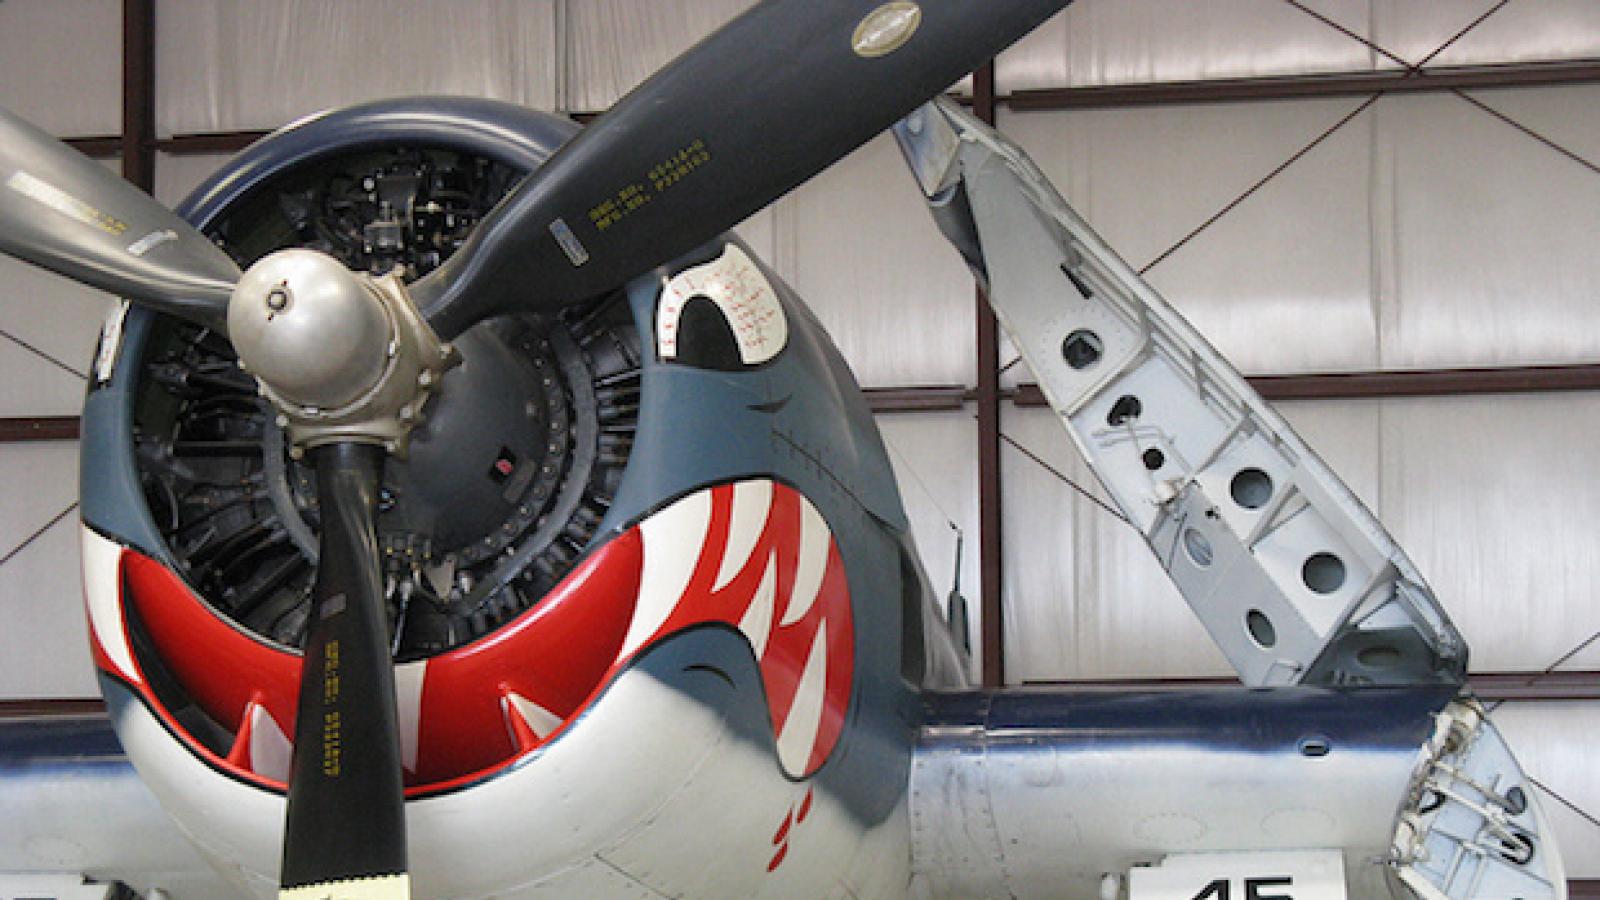 a vintage propellor plane with a shark's mouth and face painted on its cockpit